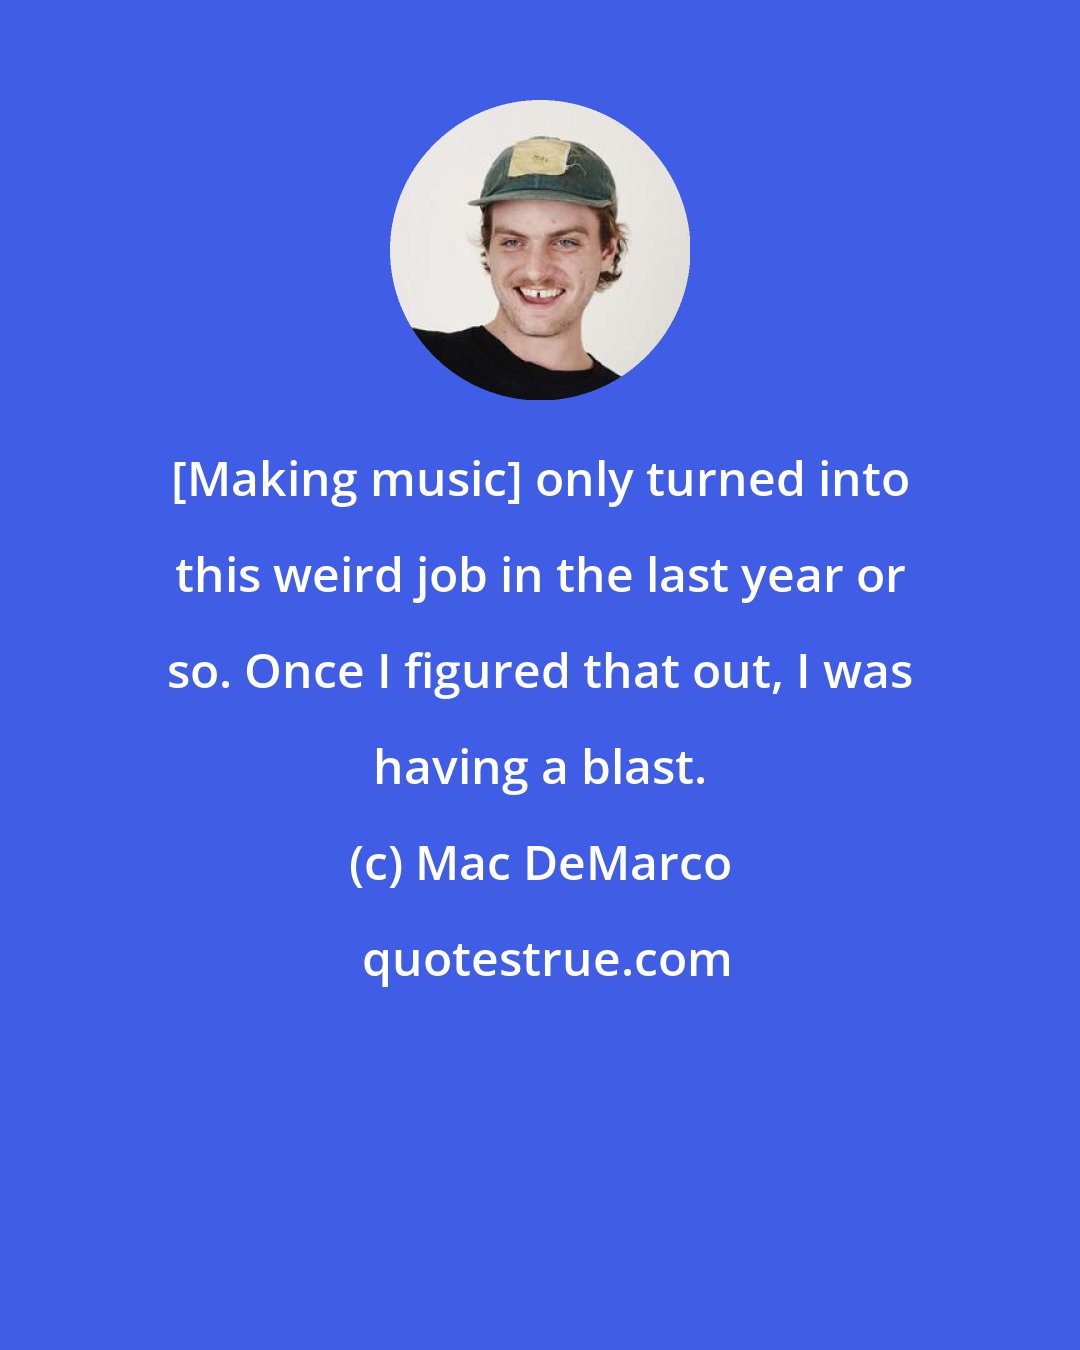 Mac DeMarco: [Making music] only turned into this weird job in the last year or so. Once I figured that out, I was having a blast.